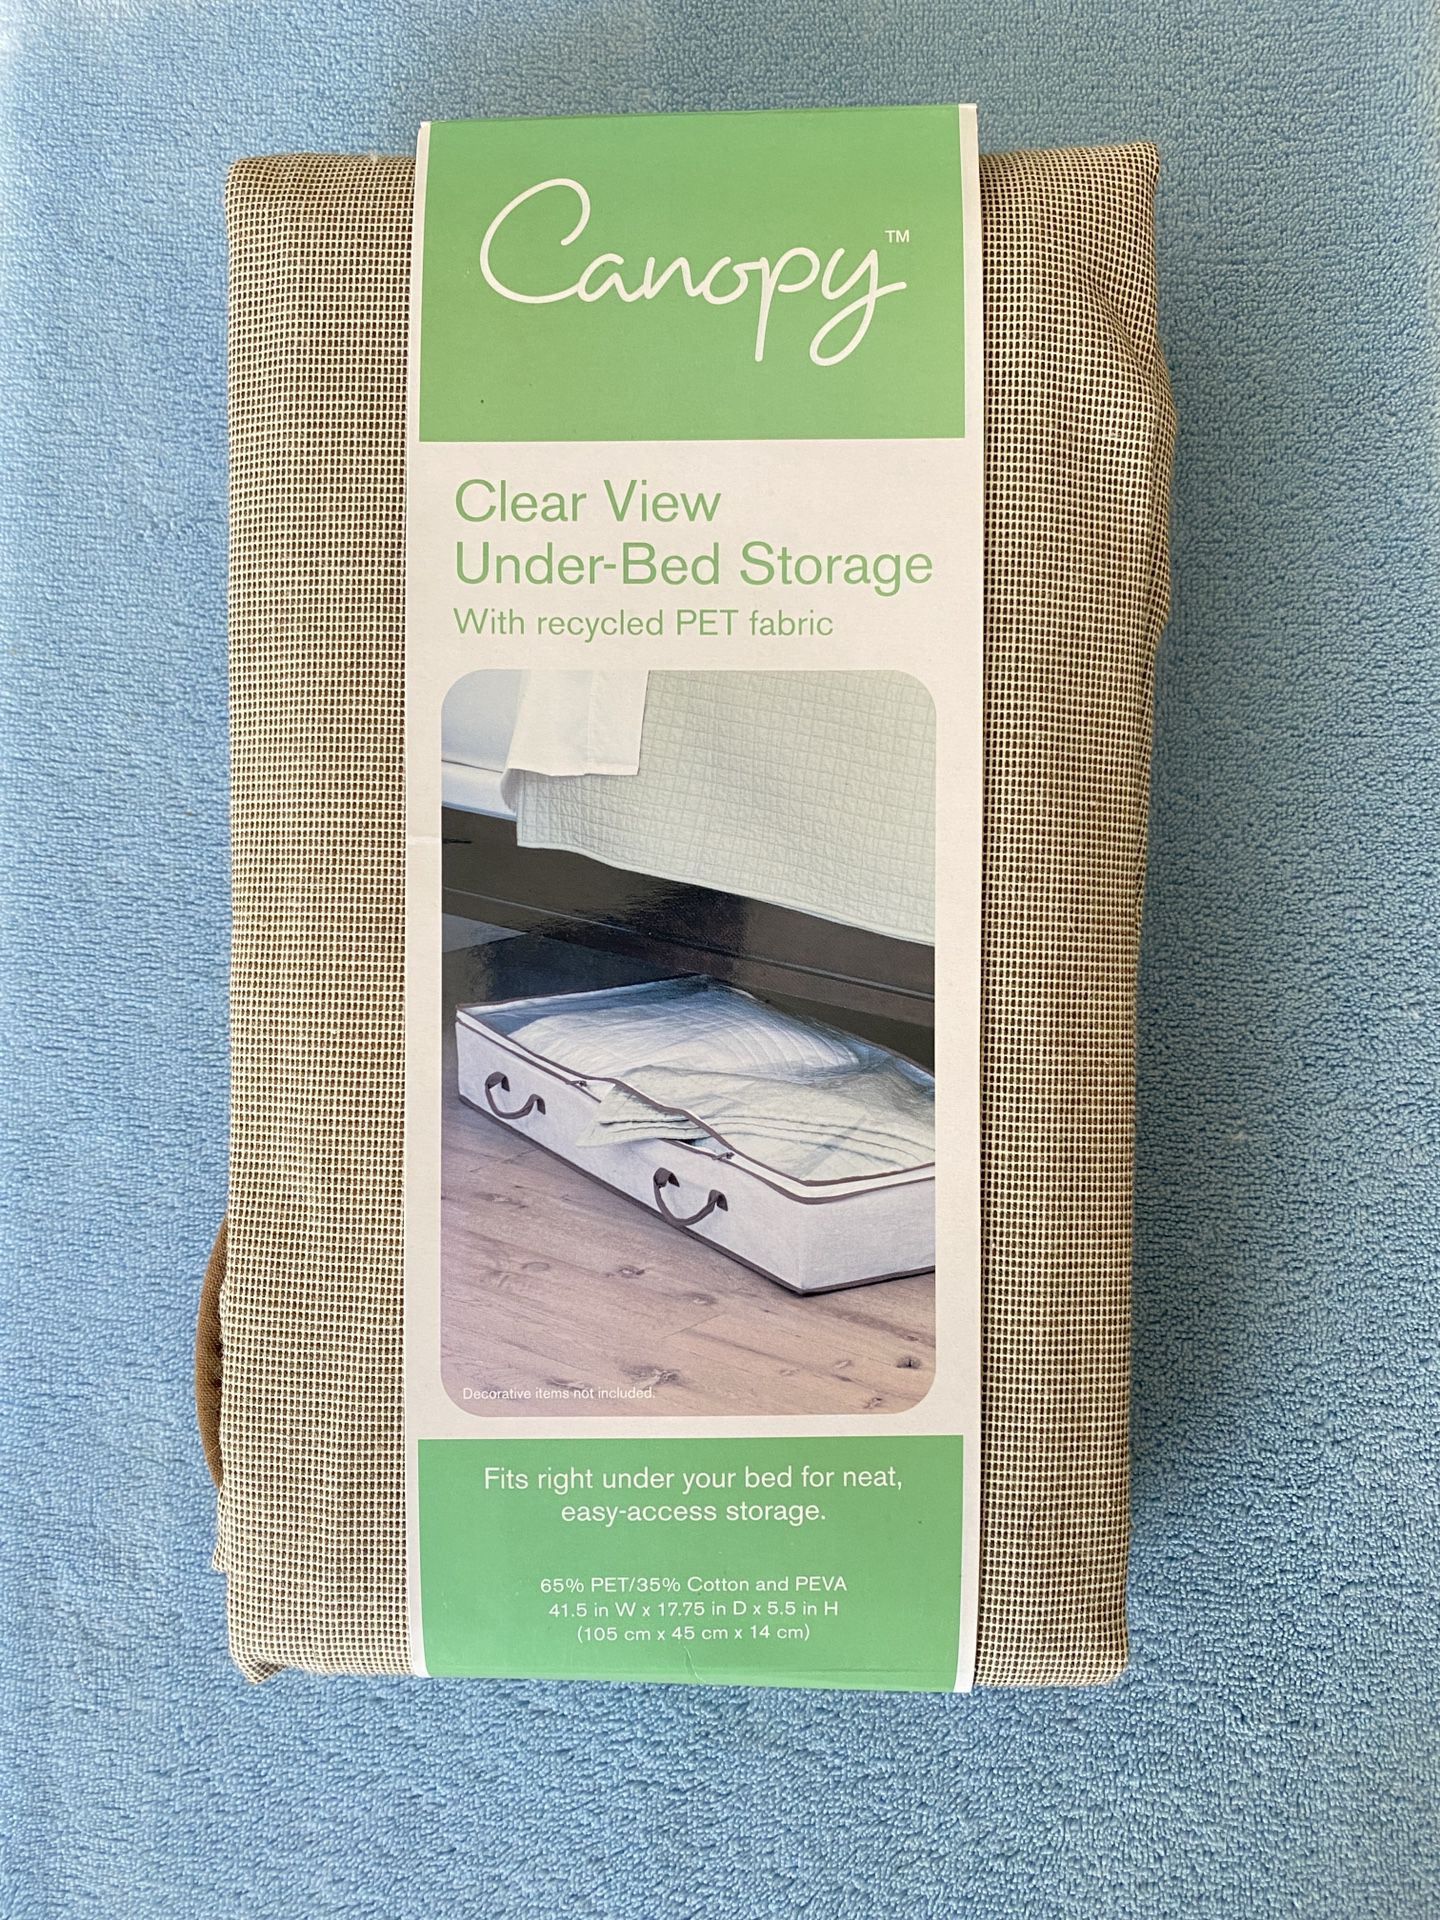 Canopy™ Clear View Under-Bed Storage